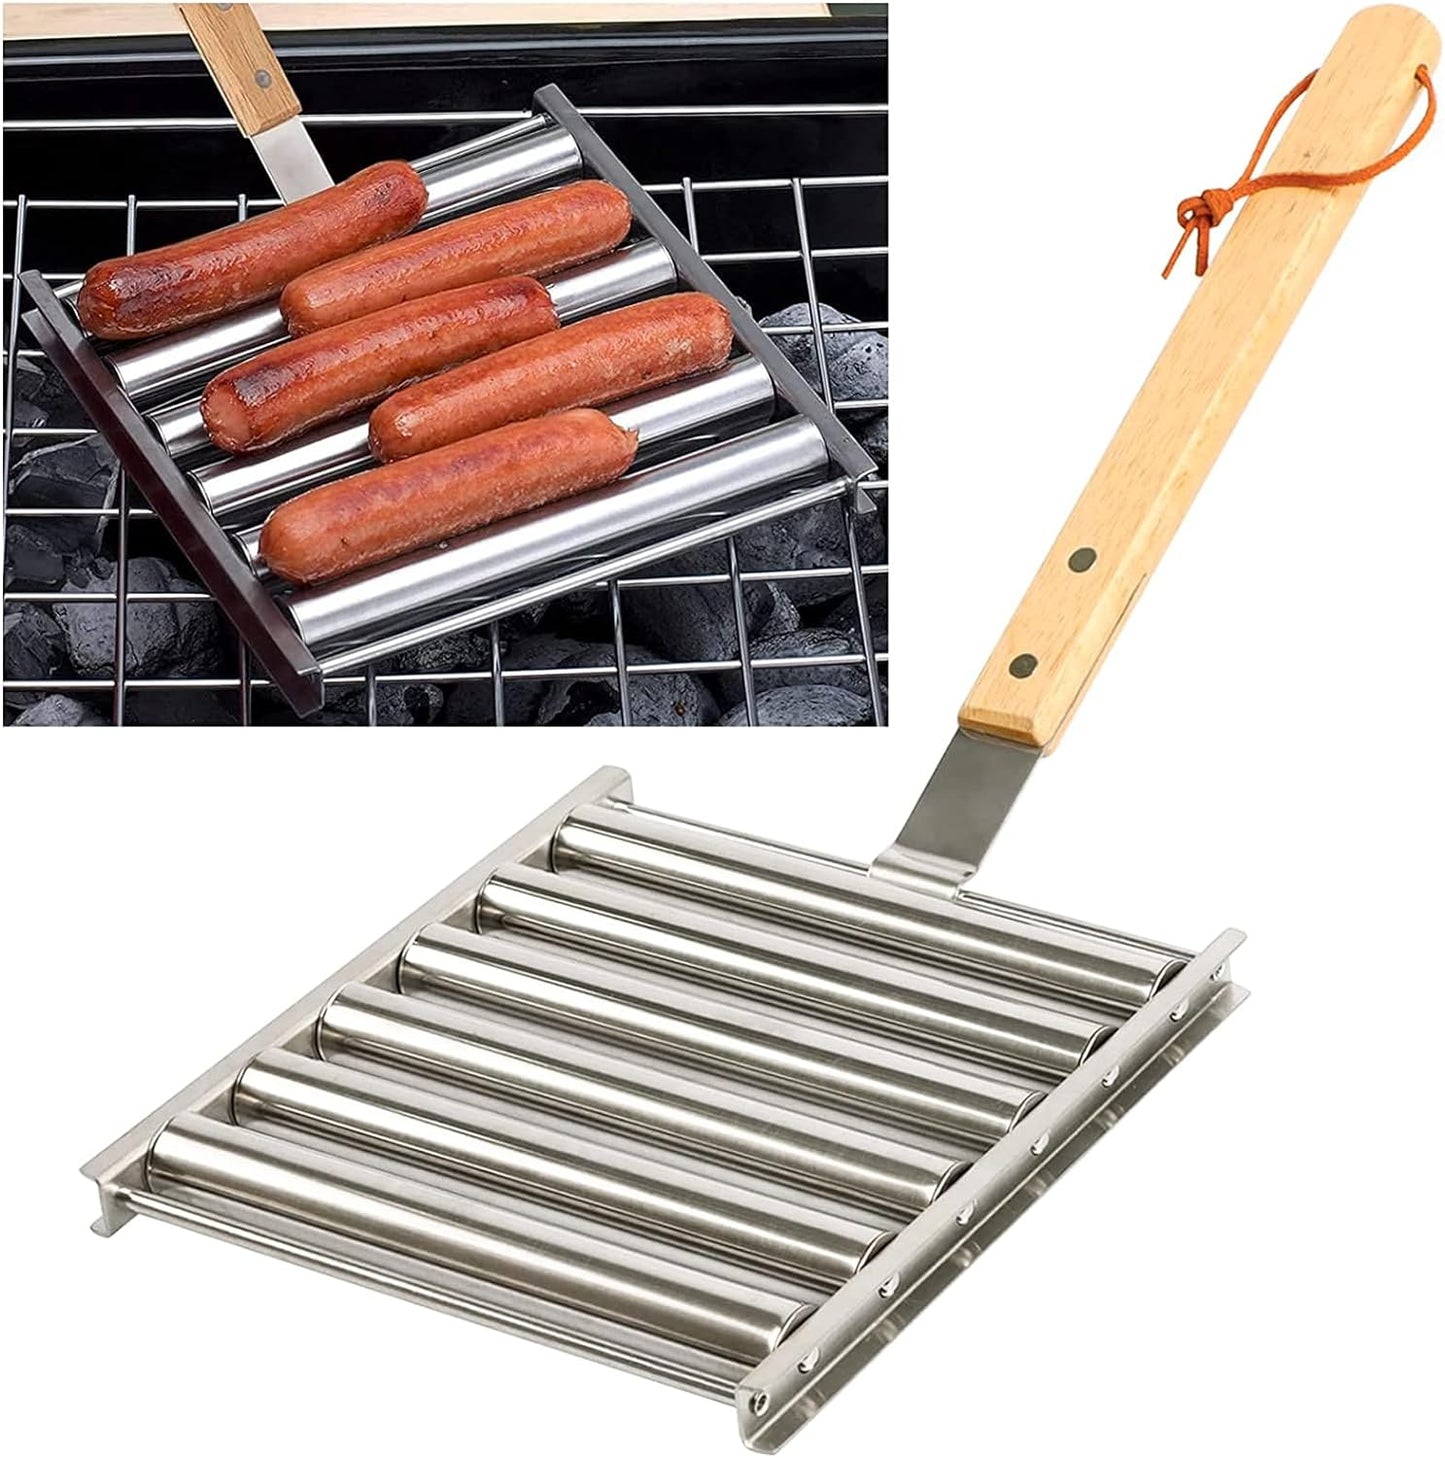 Hot Dog Roller Stainless Steel Sausage Roller Rack with Extra Long Wood Handle, BBQ Hot Dog Griller for Evenly Cooked Hot Dogs, 5 Hot Dog Capacity